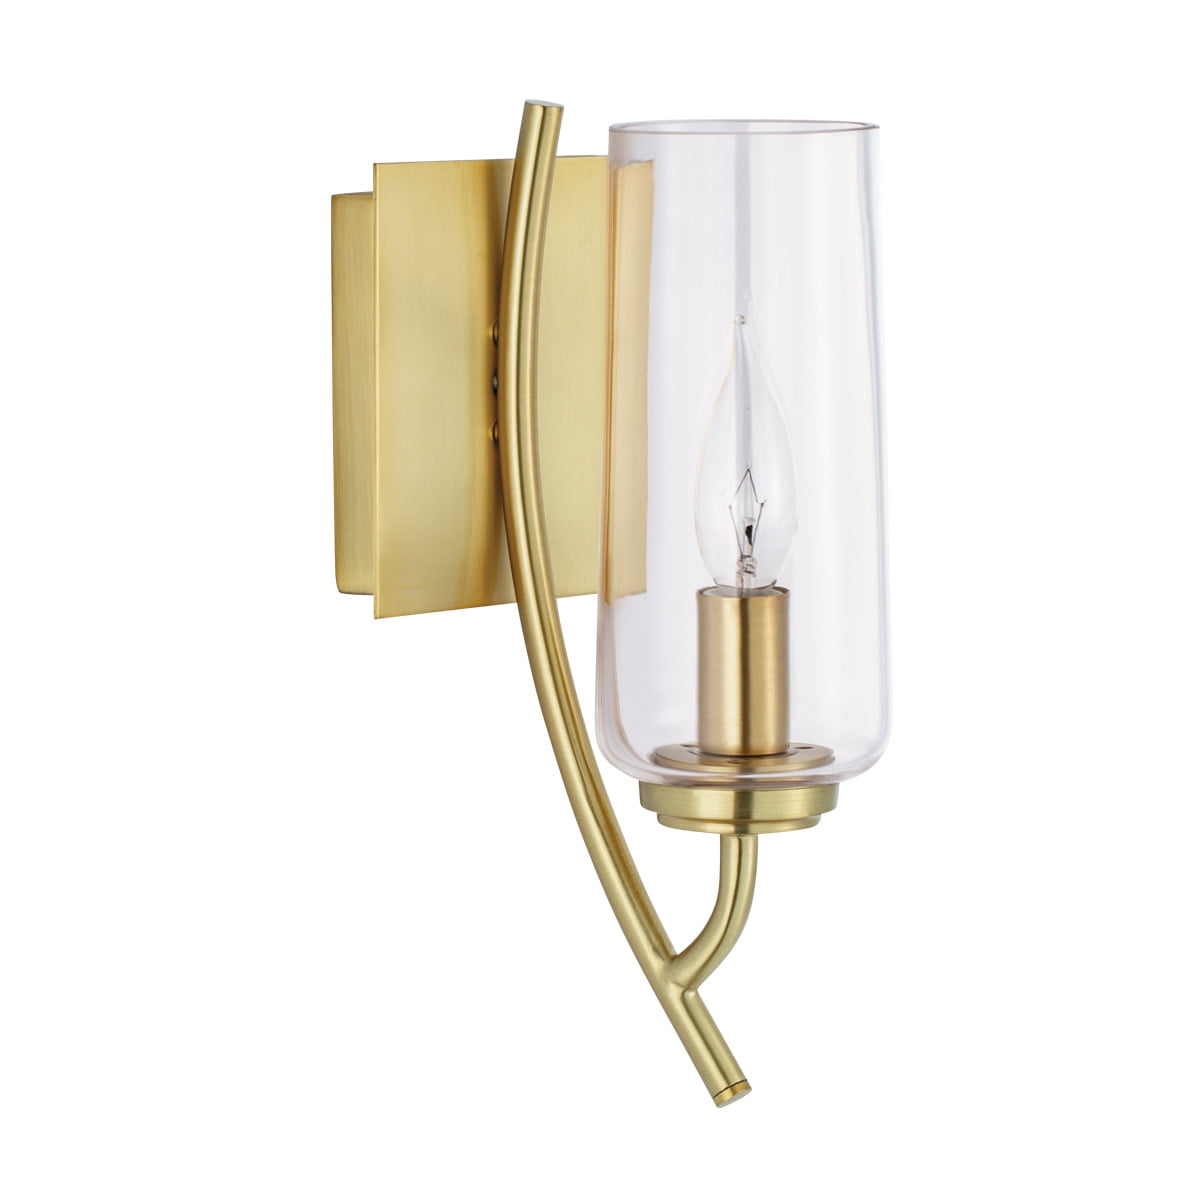 Satin Nickel And Satin Opal Glass Goblet Wall Sconce 6" x 5" 